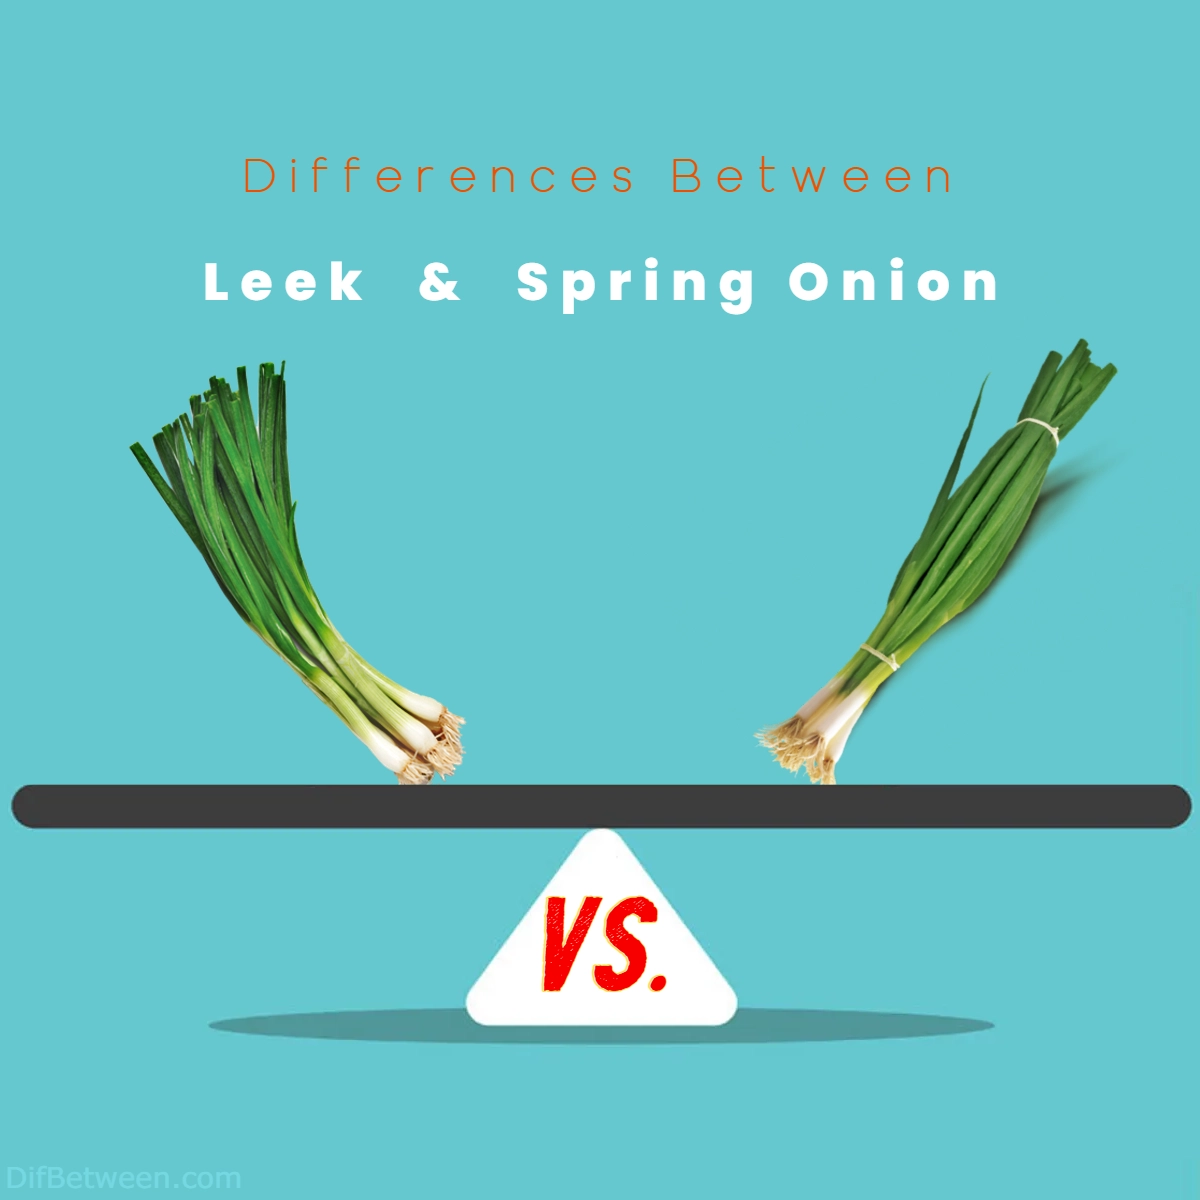 Differences Between Leek and Spring Onion